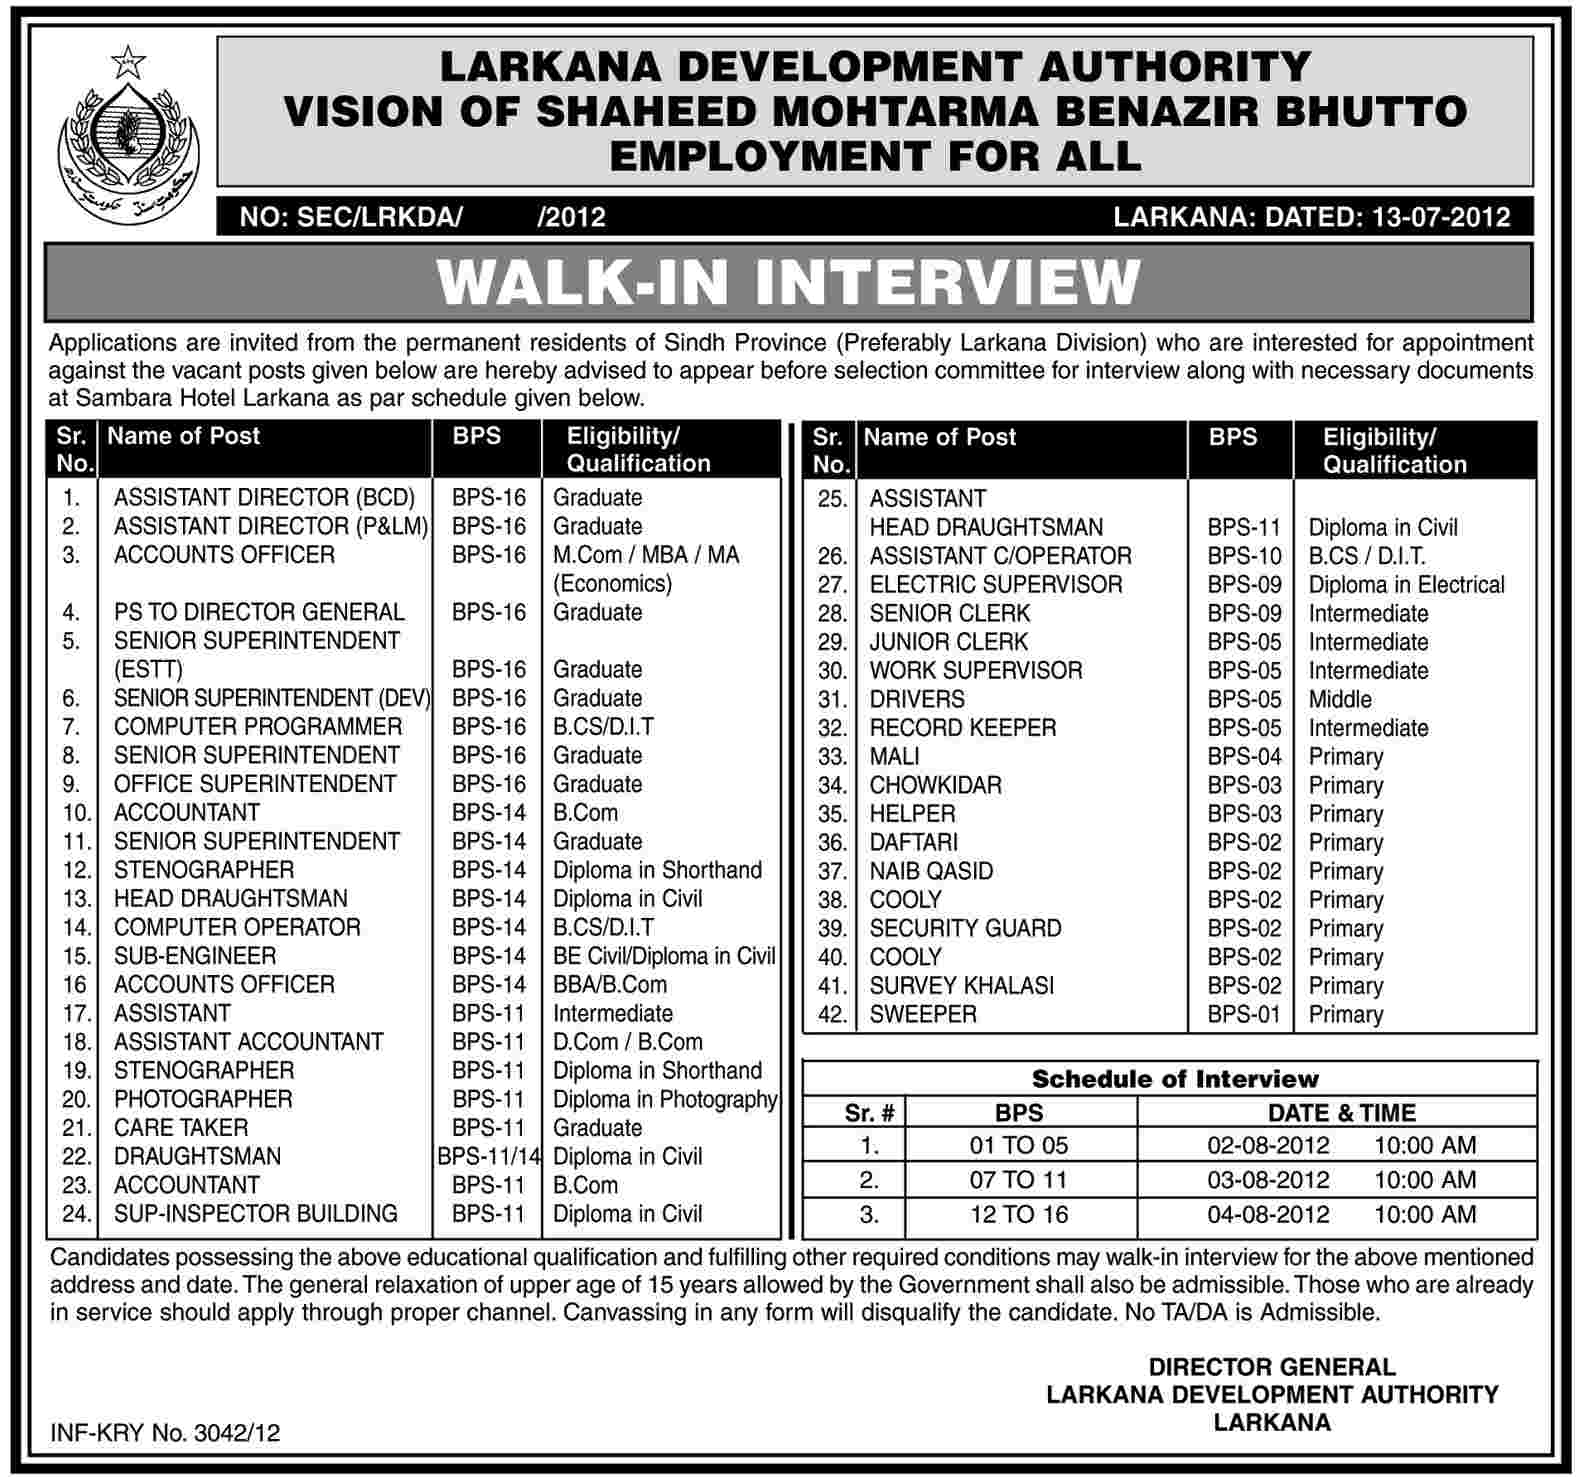 Administrative and Support Staff Required by Larkana Development Authority (Government Job)